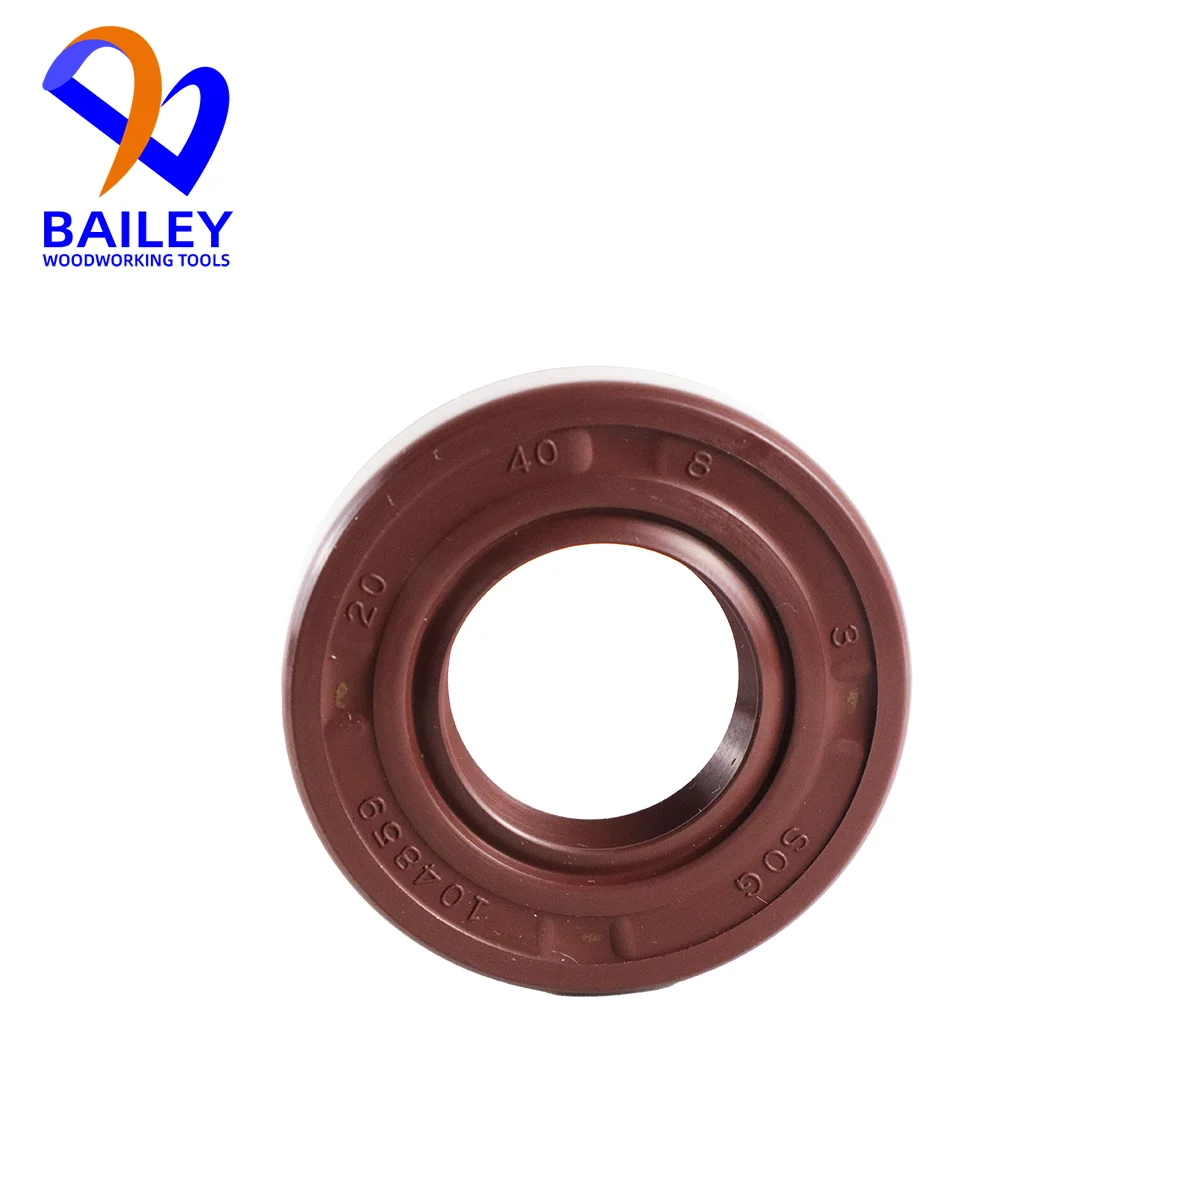 BAILEY 1Pair 40X20X8mm Oil Seal Rotary Shaft Sealing Ring for Glue Pot Parts for KDT Edge Banding Machine Woodworking Tool